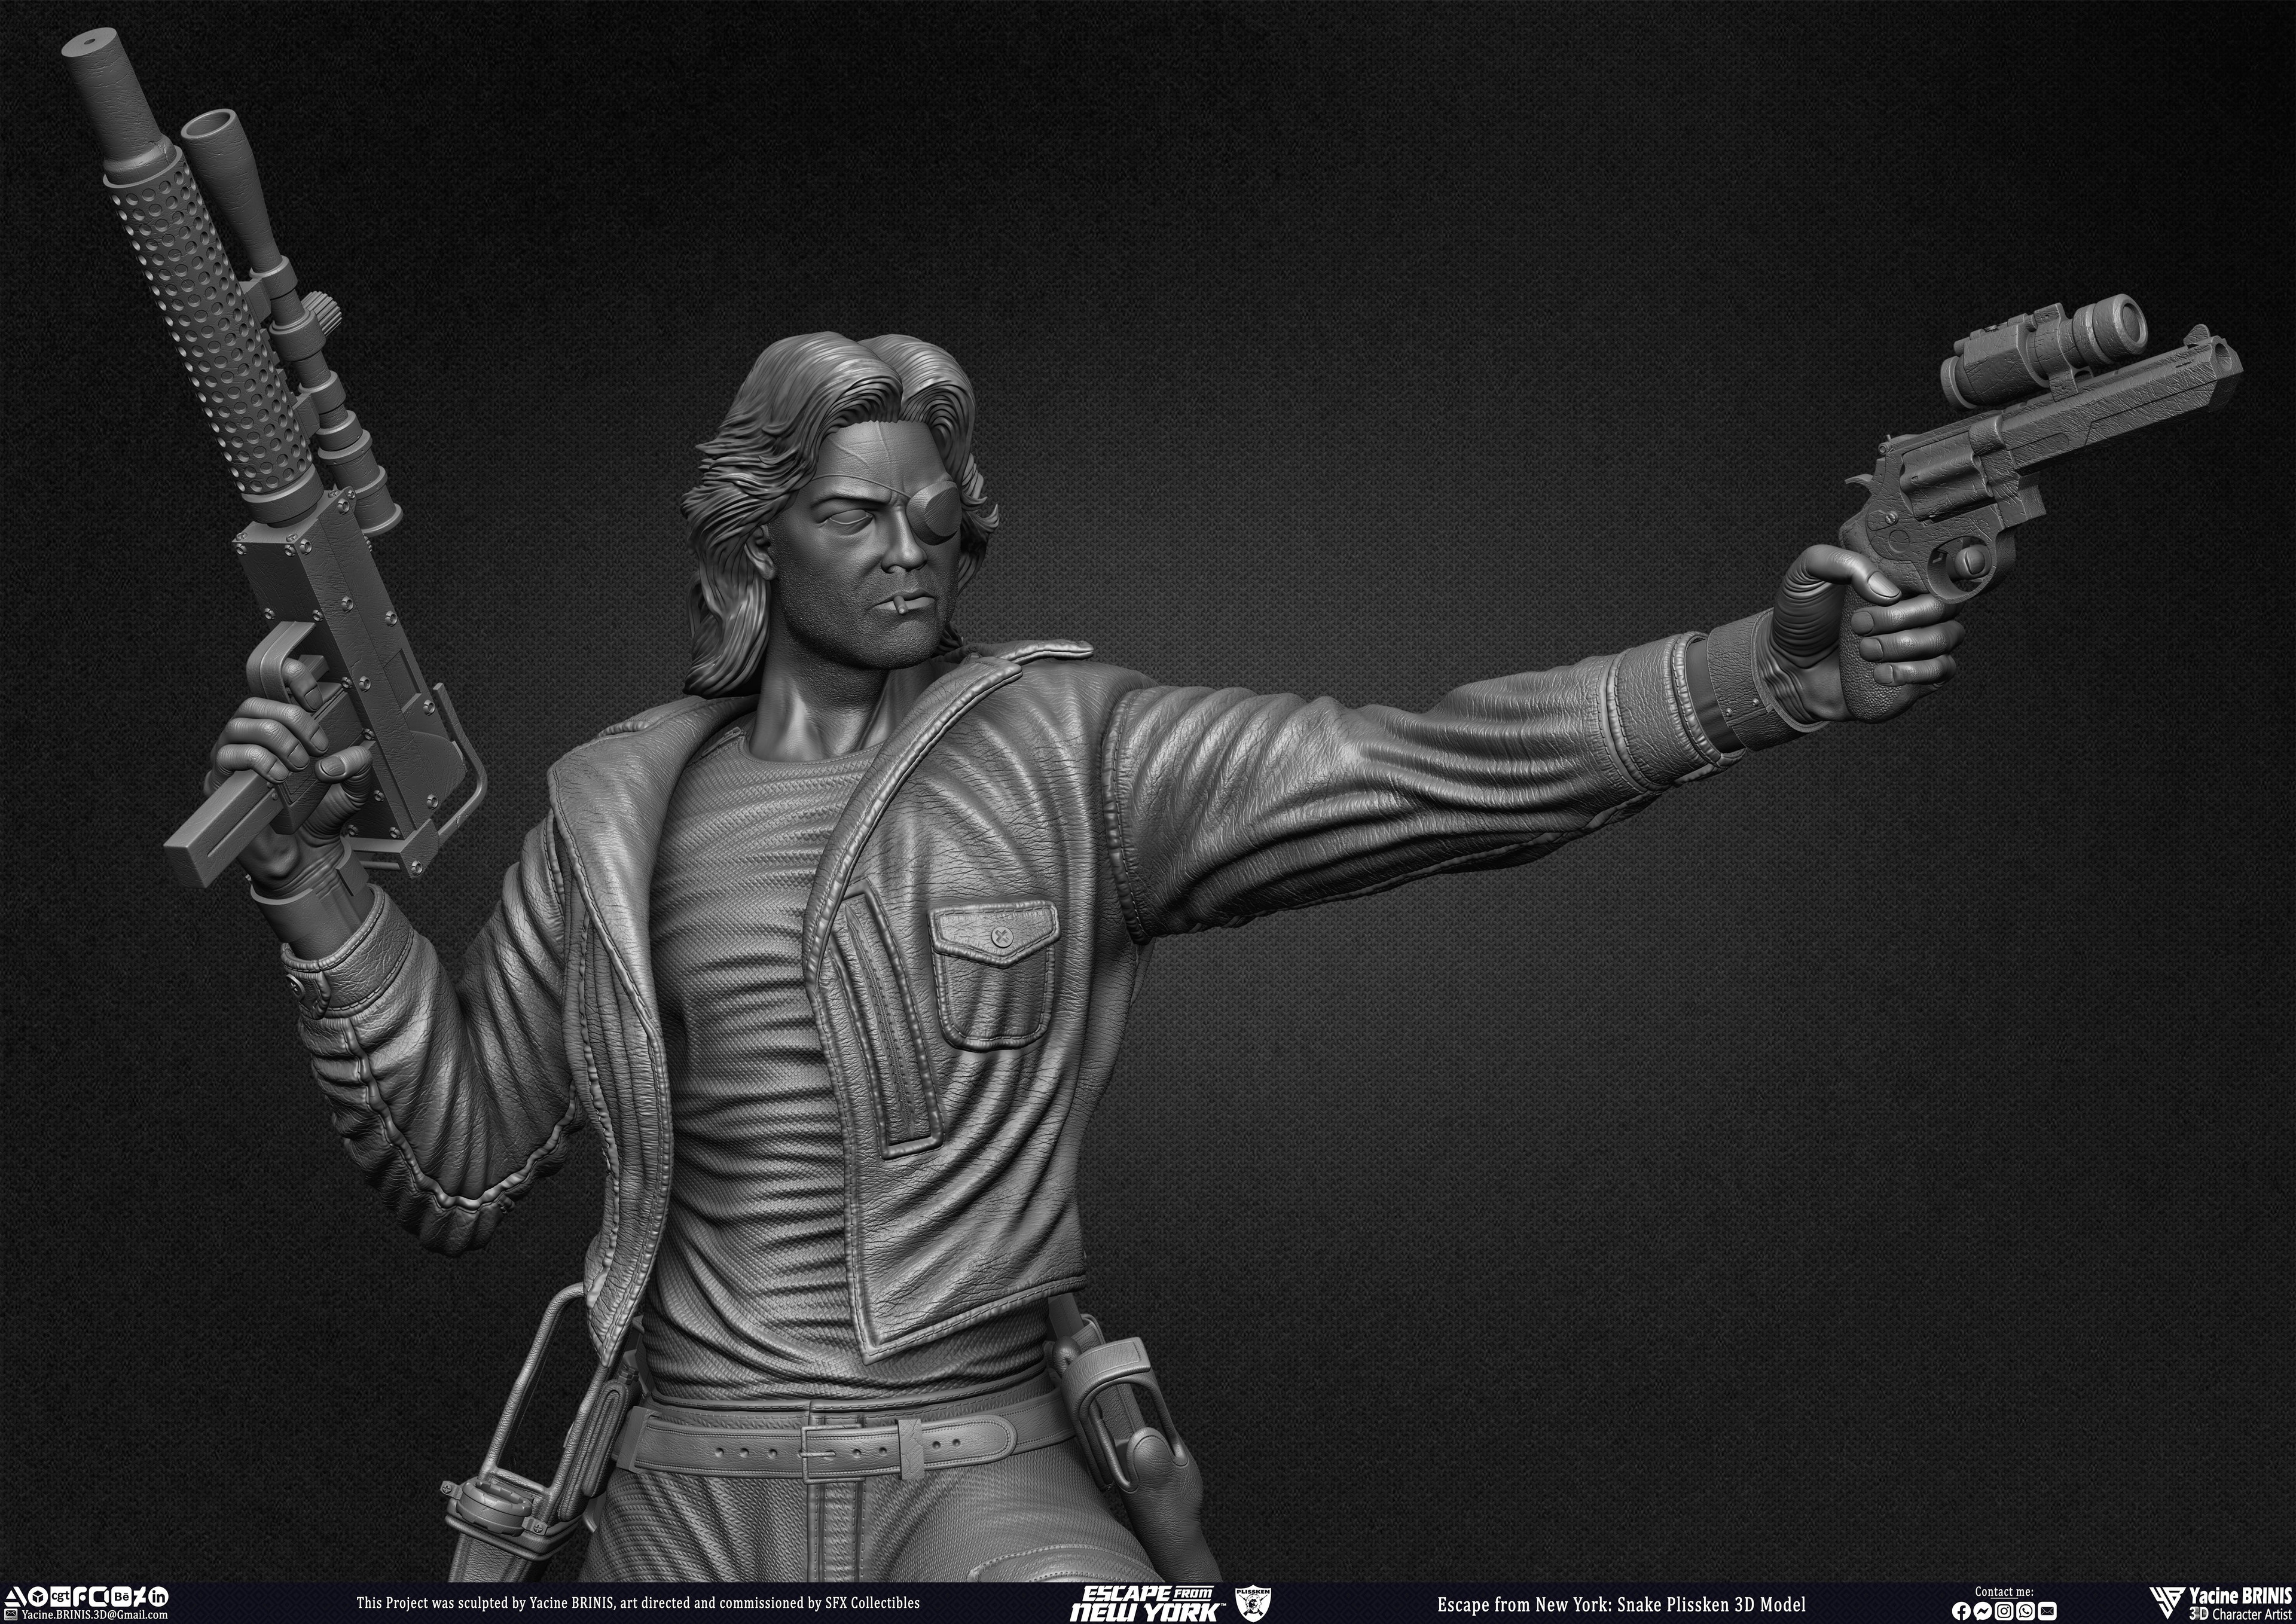 Escape from New York Snake Plissken sculpted by Yacine BRINIS 028